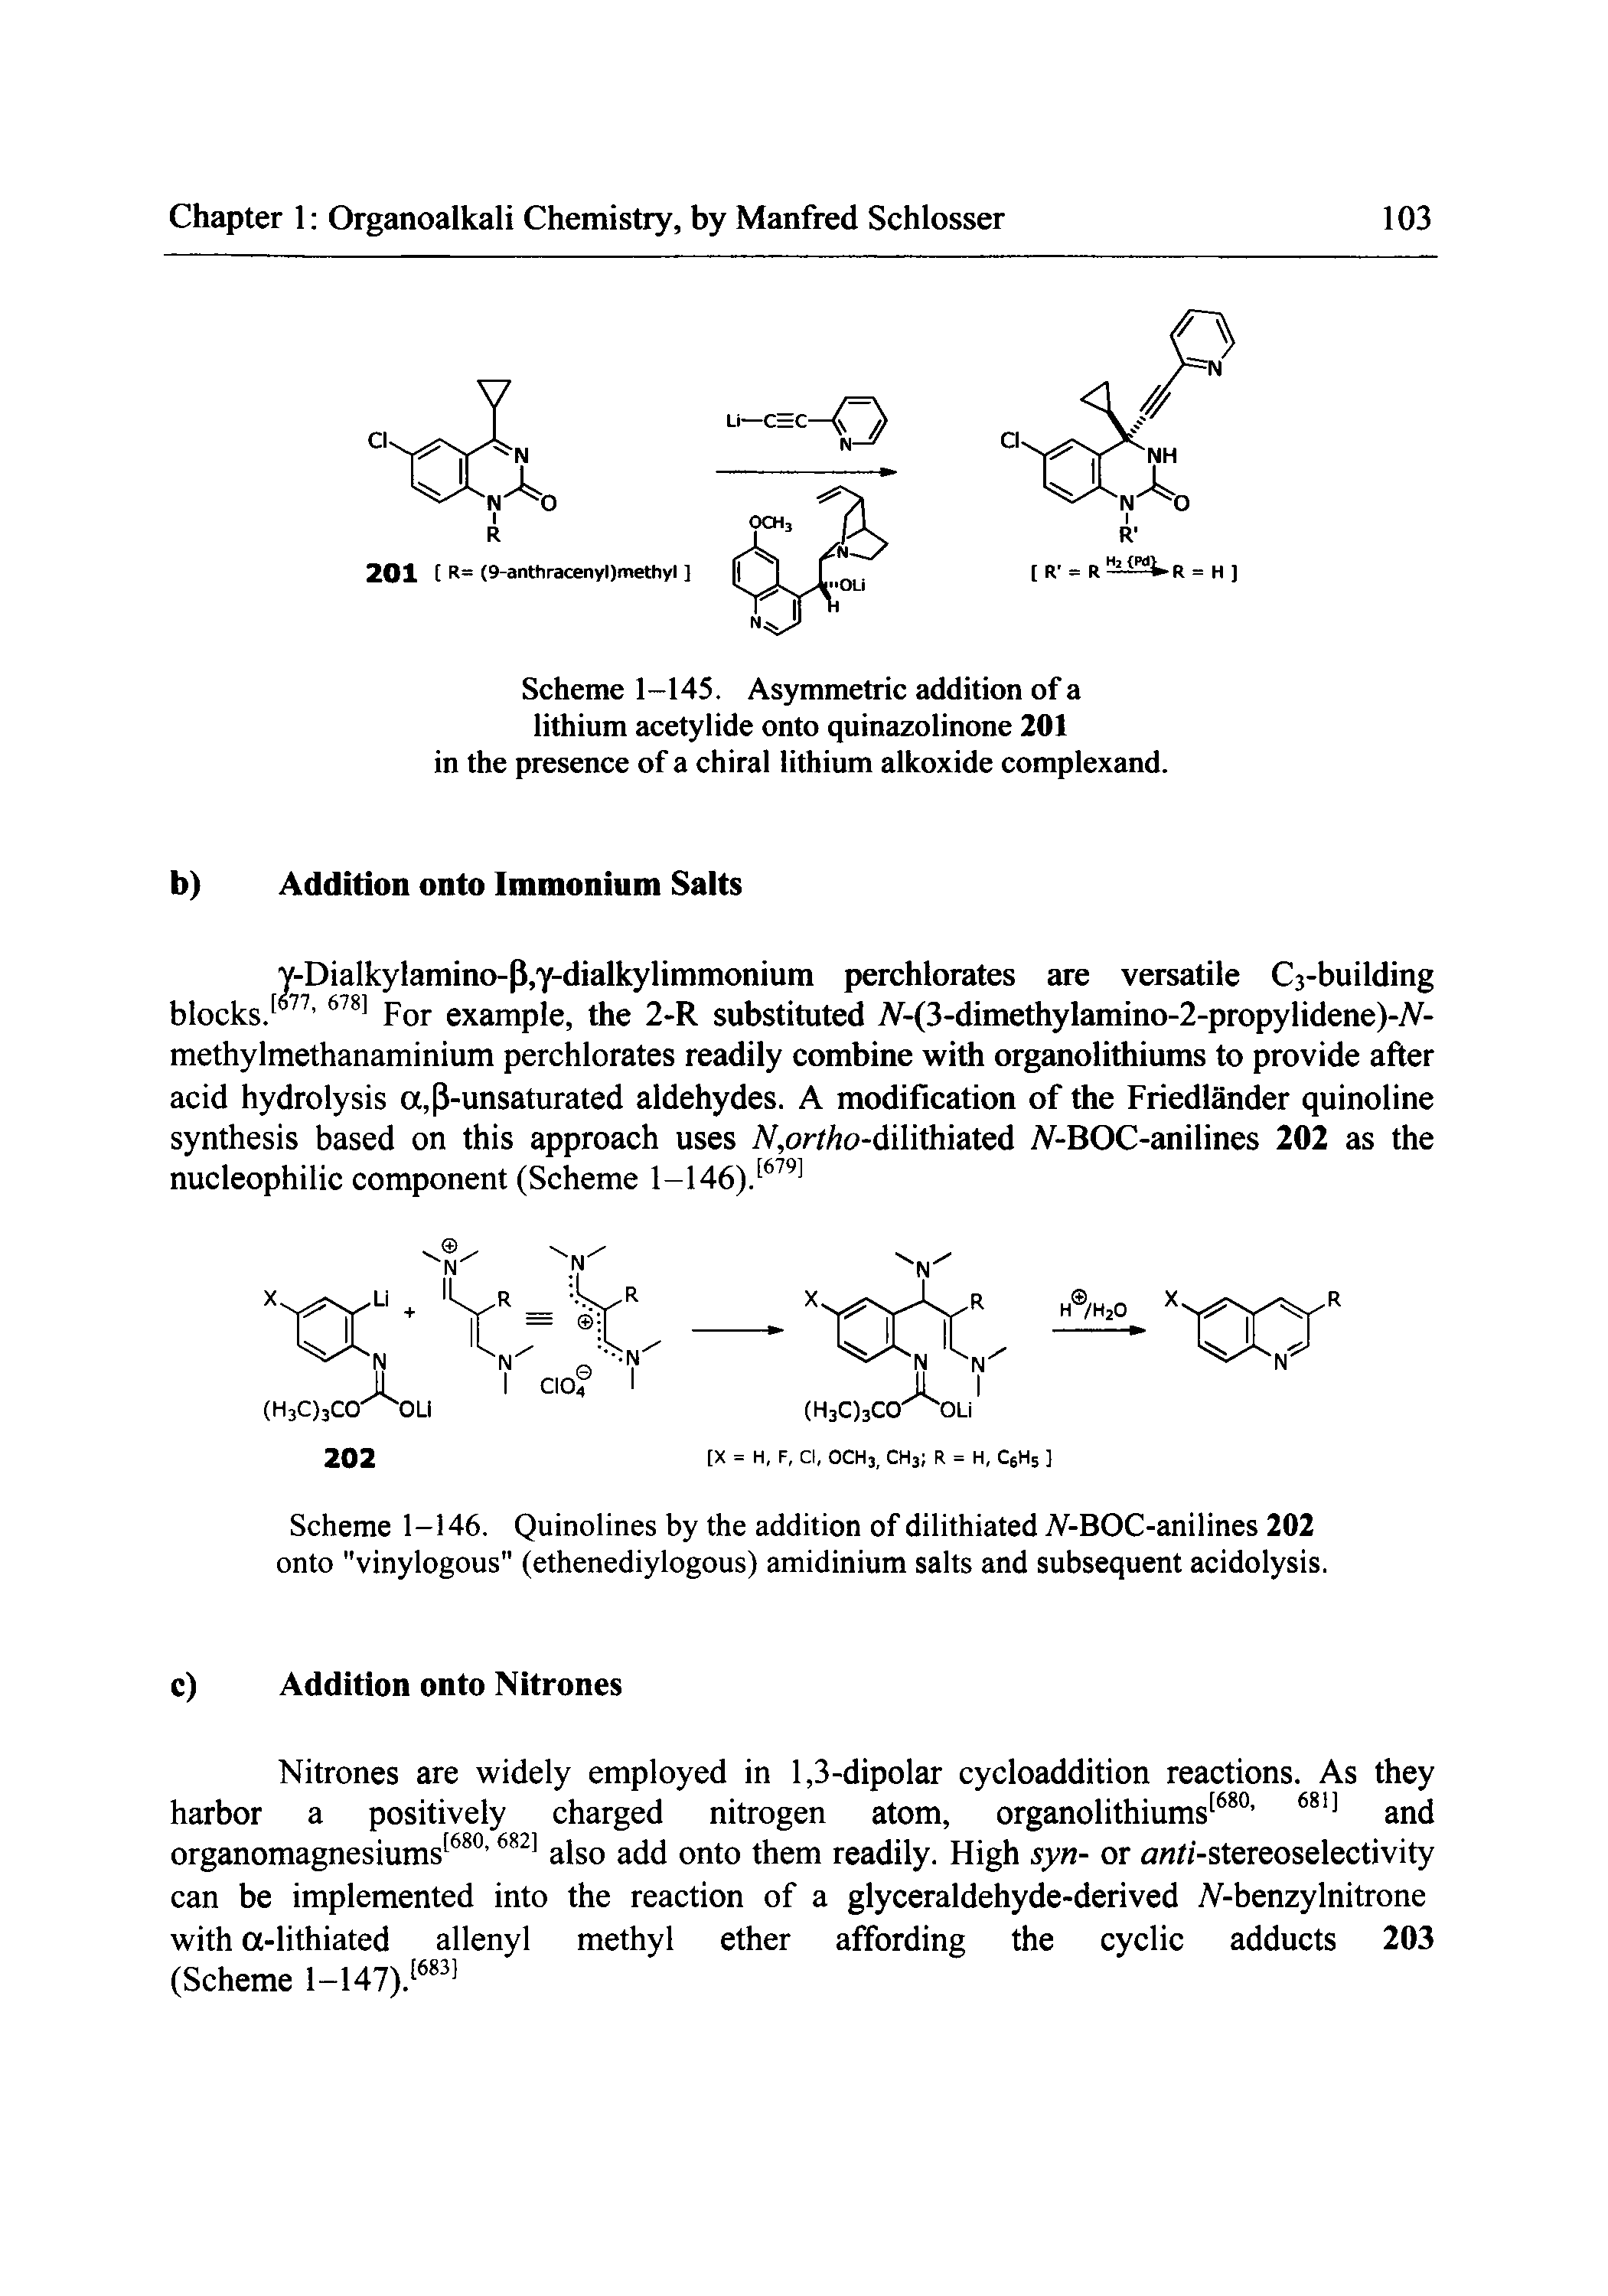 Scheme 1-146. Quinolines by the addition of dilithiated A -BOC-anilines 202 onto "vinylogous" (ethenediylogous) amidinium salts and subsequent acidolysis.